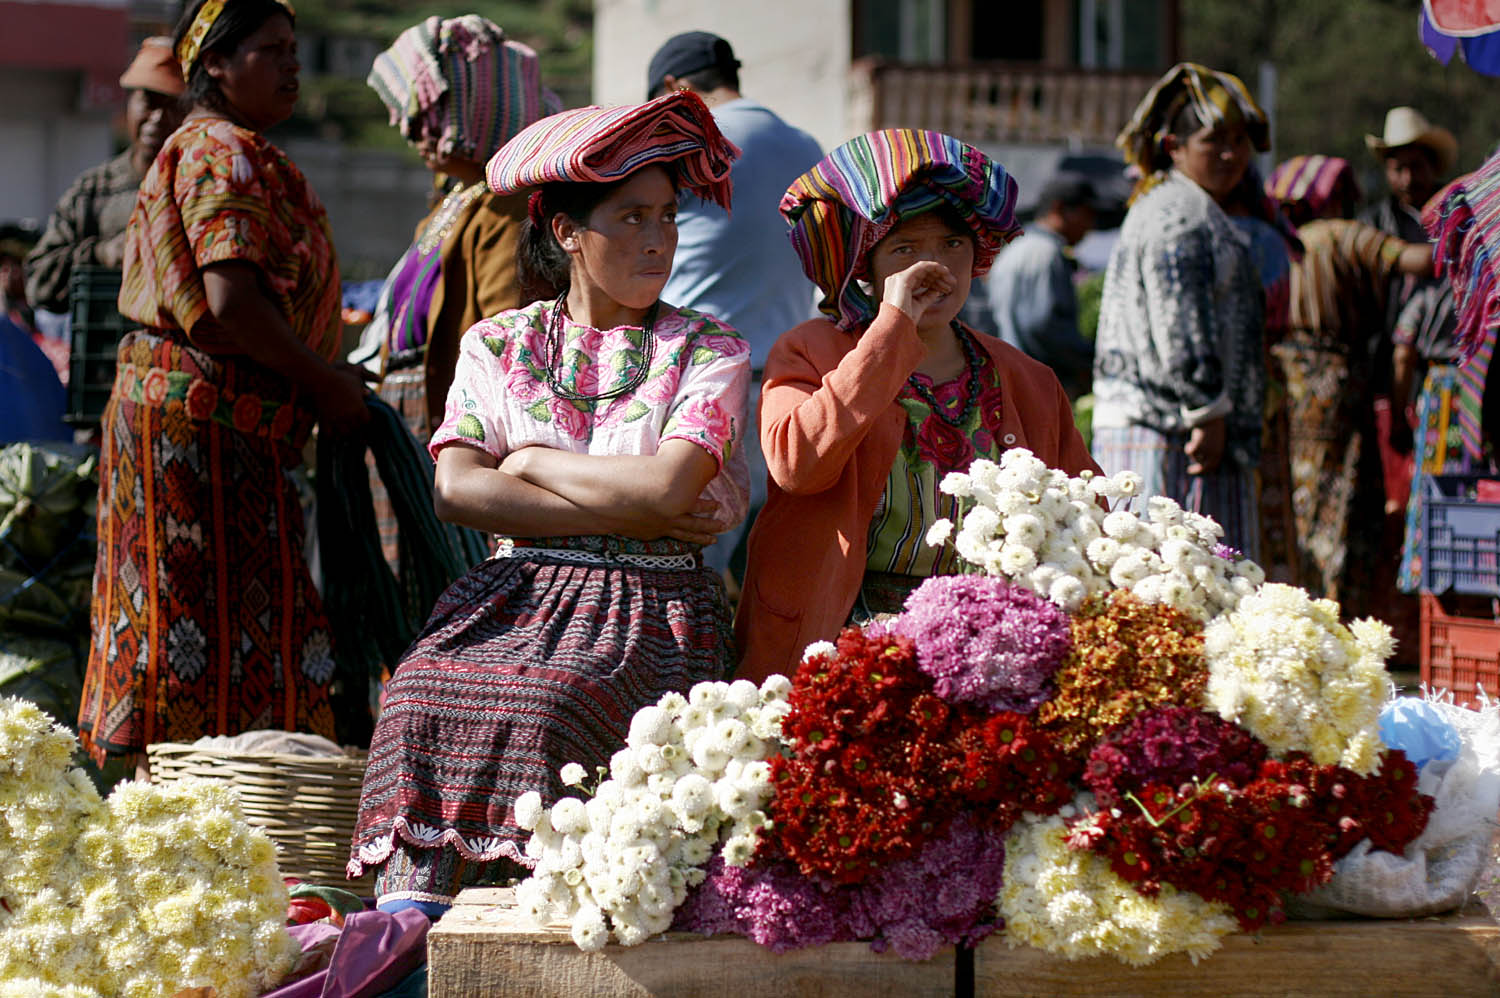  Women sell flowers in an outdoor market in Zunil, a small town near Quetzaltenango, Guatemala. At the market an announcer advertised items over a loudspeaker as farmers hurried around the square carrying huge bushels of vegetables. 